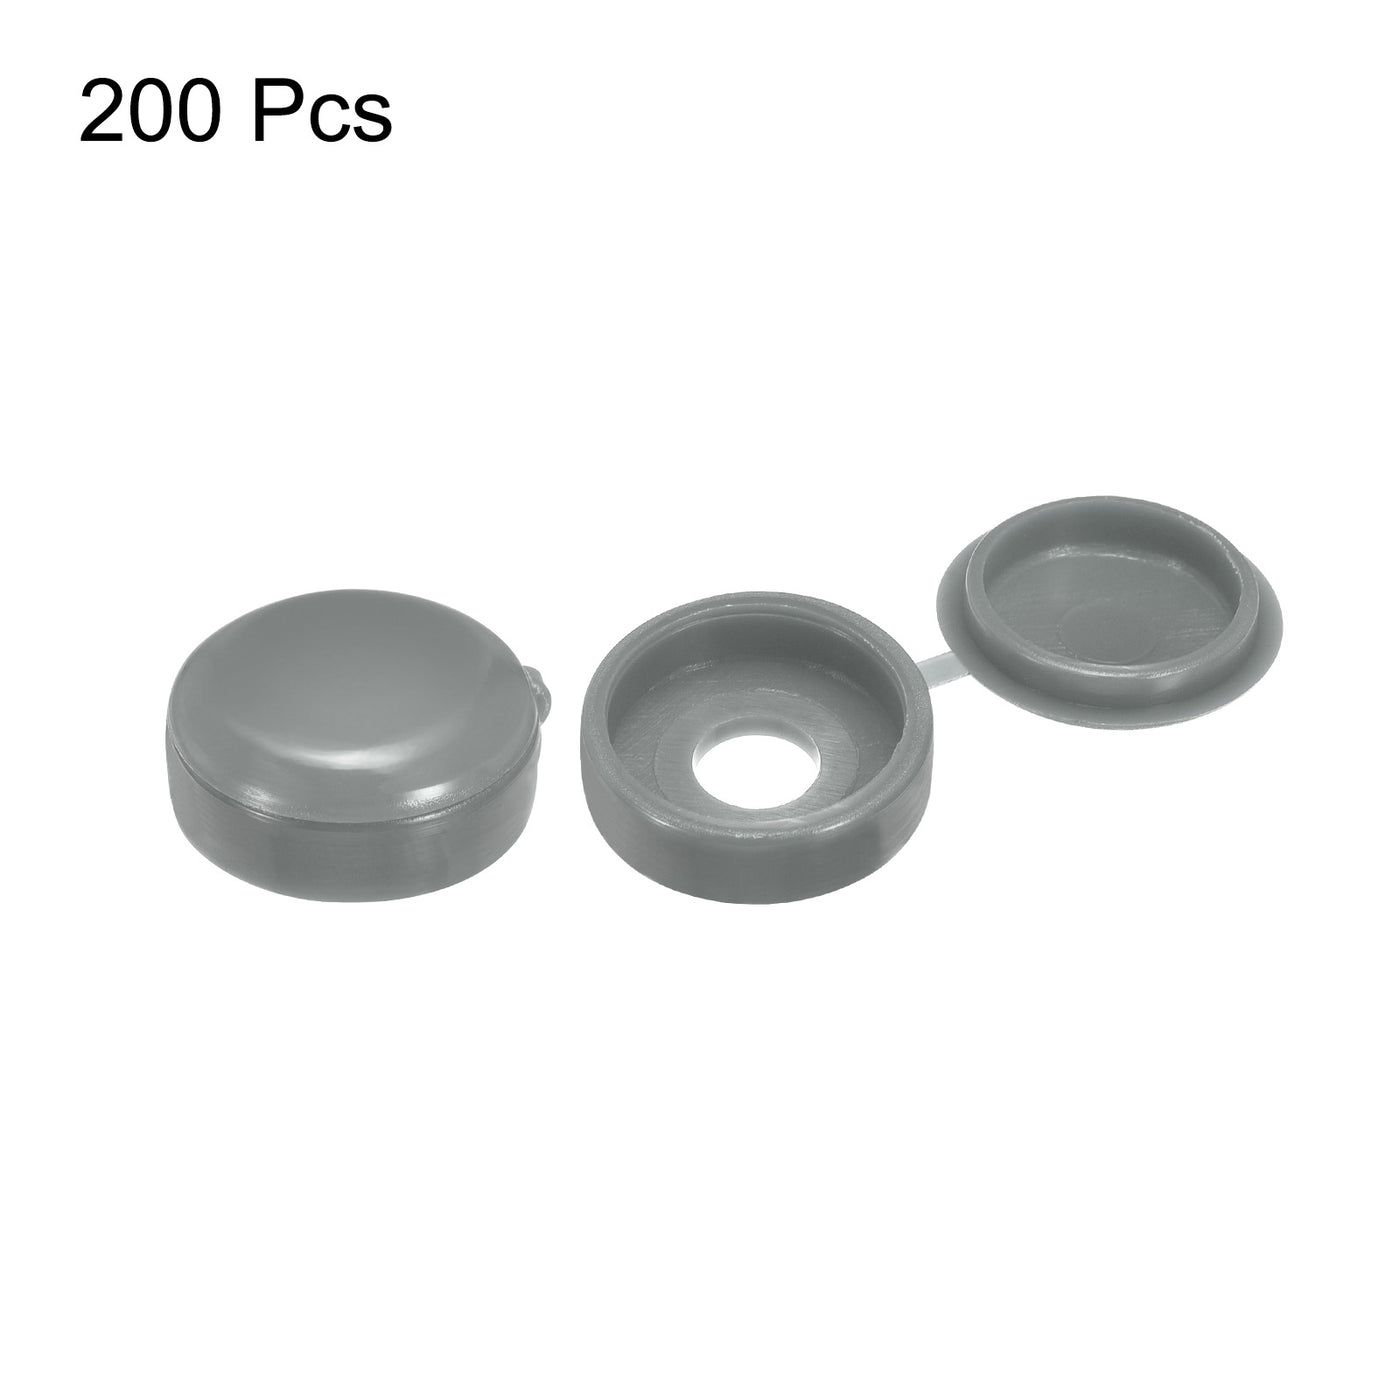 uxcell Uxcell 200Pcs 6mm Hinged Screw Cover Caps Plastic Fold Screw Snap Covers, Gray